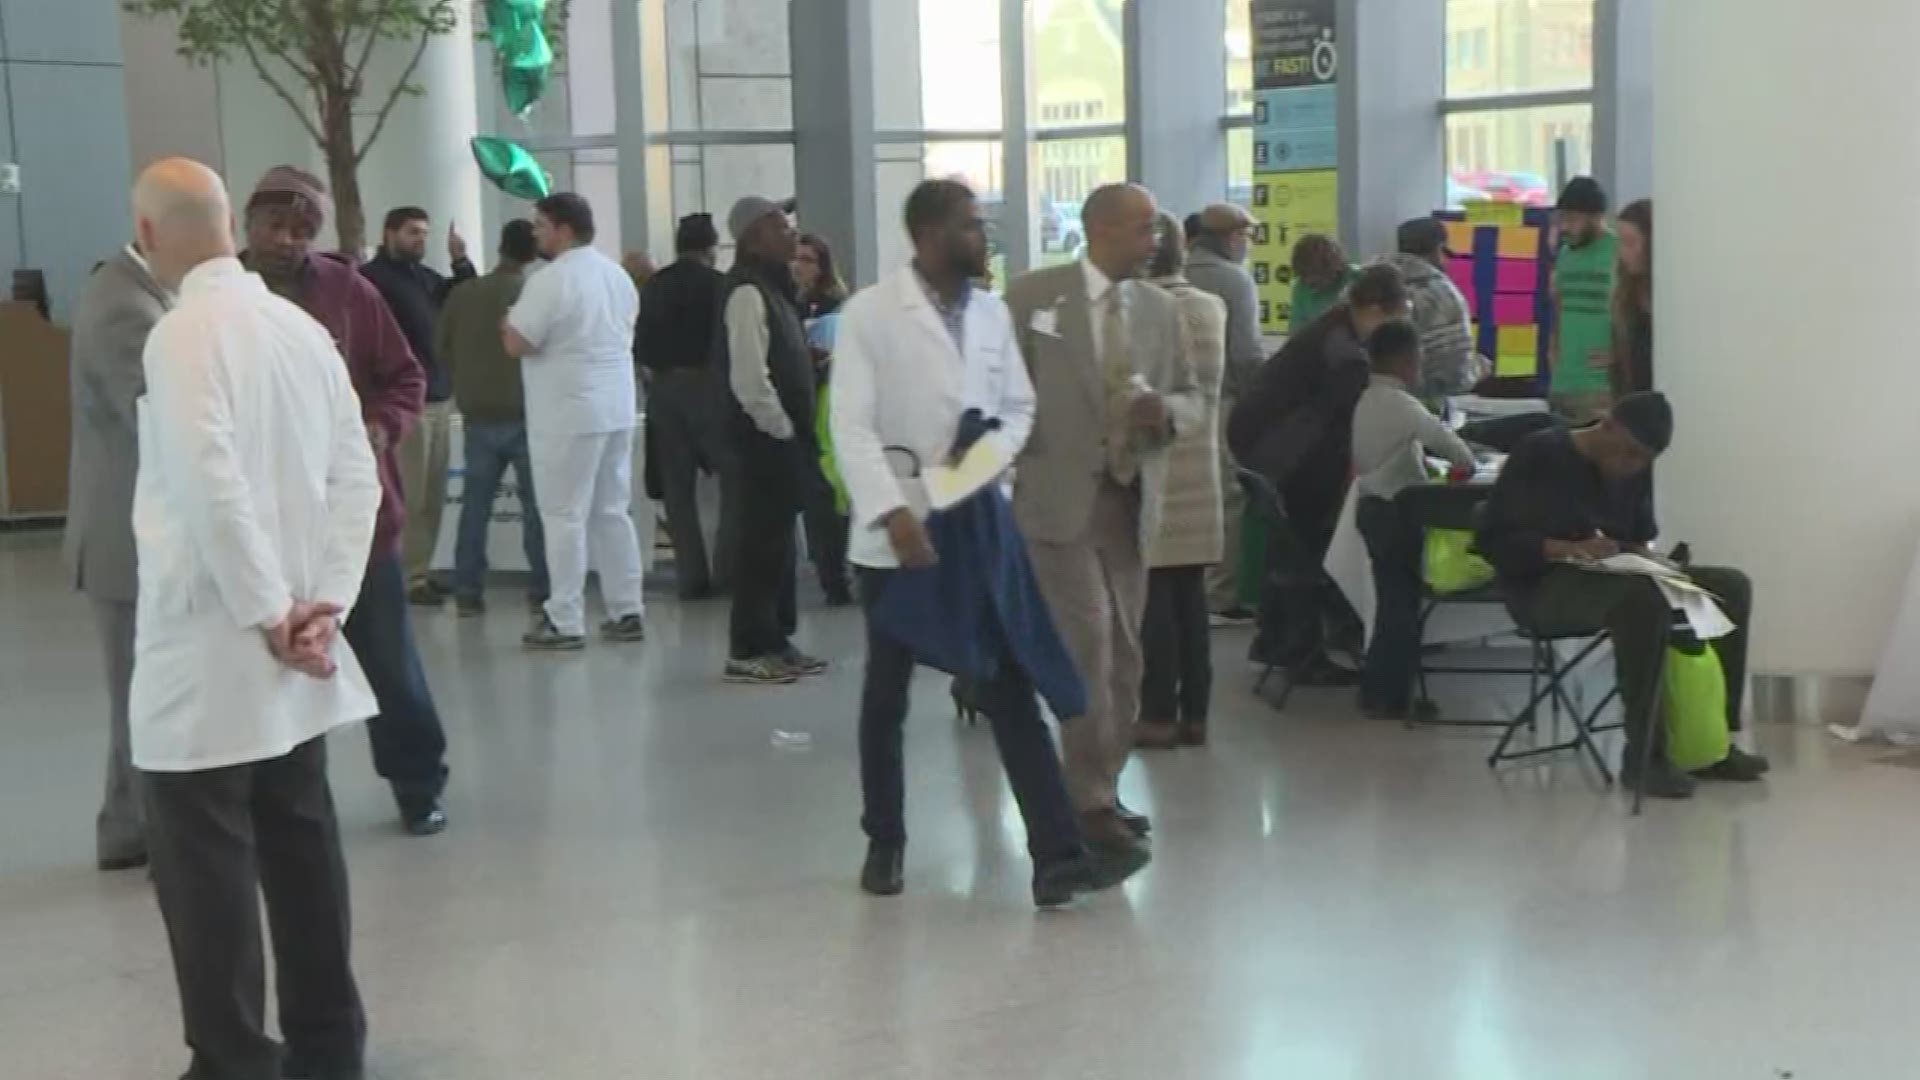 Minority Men's Health Fair taking place at Cleveland Clinic